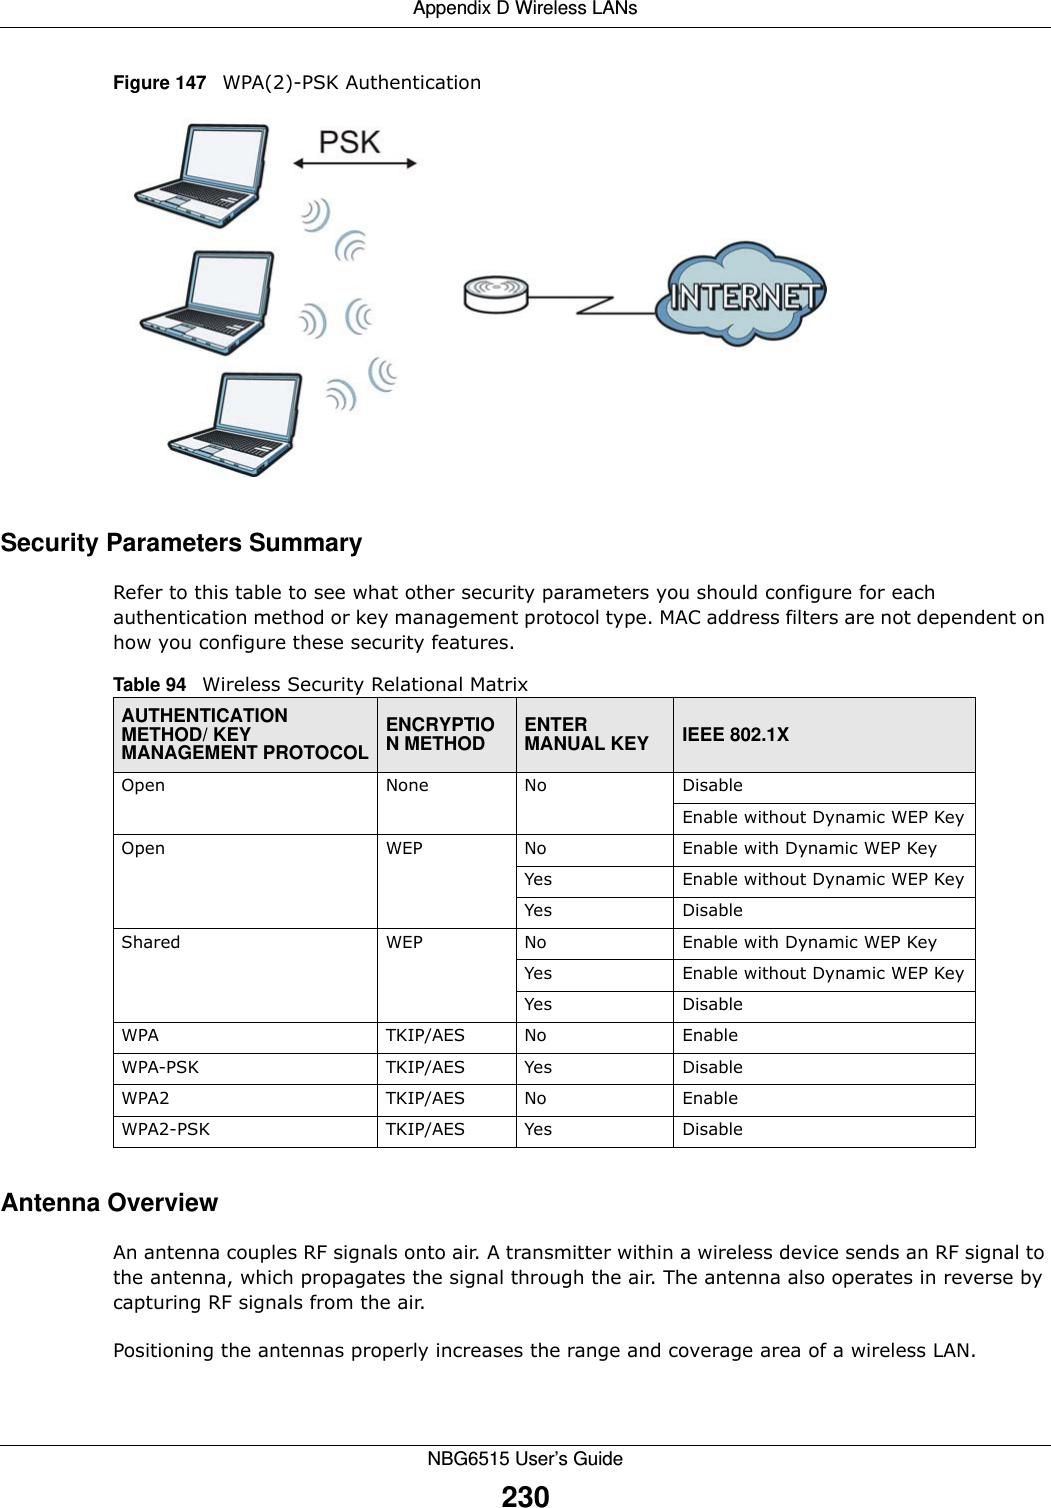 Appendix D Wireless LANsNBG6515 User’s Guide230Figure 147   WPA(2)-PSK AuthenticationSecurity Parameters SummaryRefer to this table to see what other security parameters you should configure for each authentication method or key management protocol type. MAC address filters are not dependent on how you configure these security features.Antenna OverviewAn antenna couples RF signals onto air. A transmitter within a wireless device sends an RF signal to the antenna, which propagates the signal through the air. The antenna also operates in reverse by capturing RF signals from the air. Positioning the antennas properly increases the range and coverage area of a wireless LAN. Table 94   Wireless Security Relational MatrixAUTHENTICATION METHOD/ KEY MANAGEMENT PROTOCOLENCRYPTION METHODENTER MANUAL KEY IEEE 802.1XOpen None No DisableEnable without Dynamic WEP KeyOpen WEP No           Enable with Dynamic WEP KeyYes Enable without Dynamic WEP KeyYes DisableShared WEP  No           Enable with Dynamic WEP KeyYes Enable without Dynamic WEP KeyYes DisableWPA  TKIP/AES No EnableWPA-PSK  TKIP/AES Yes DisableWPA2 TKIP/AES No EnableWPA2-PSK  TKIP/AES Yes Disable